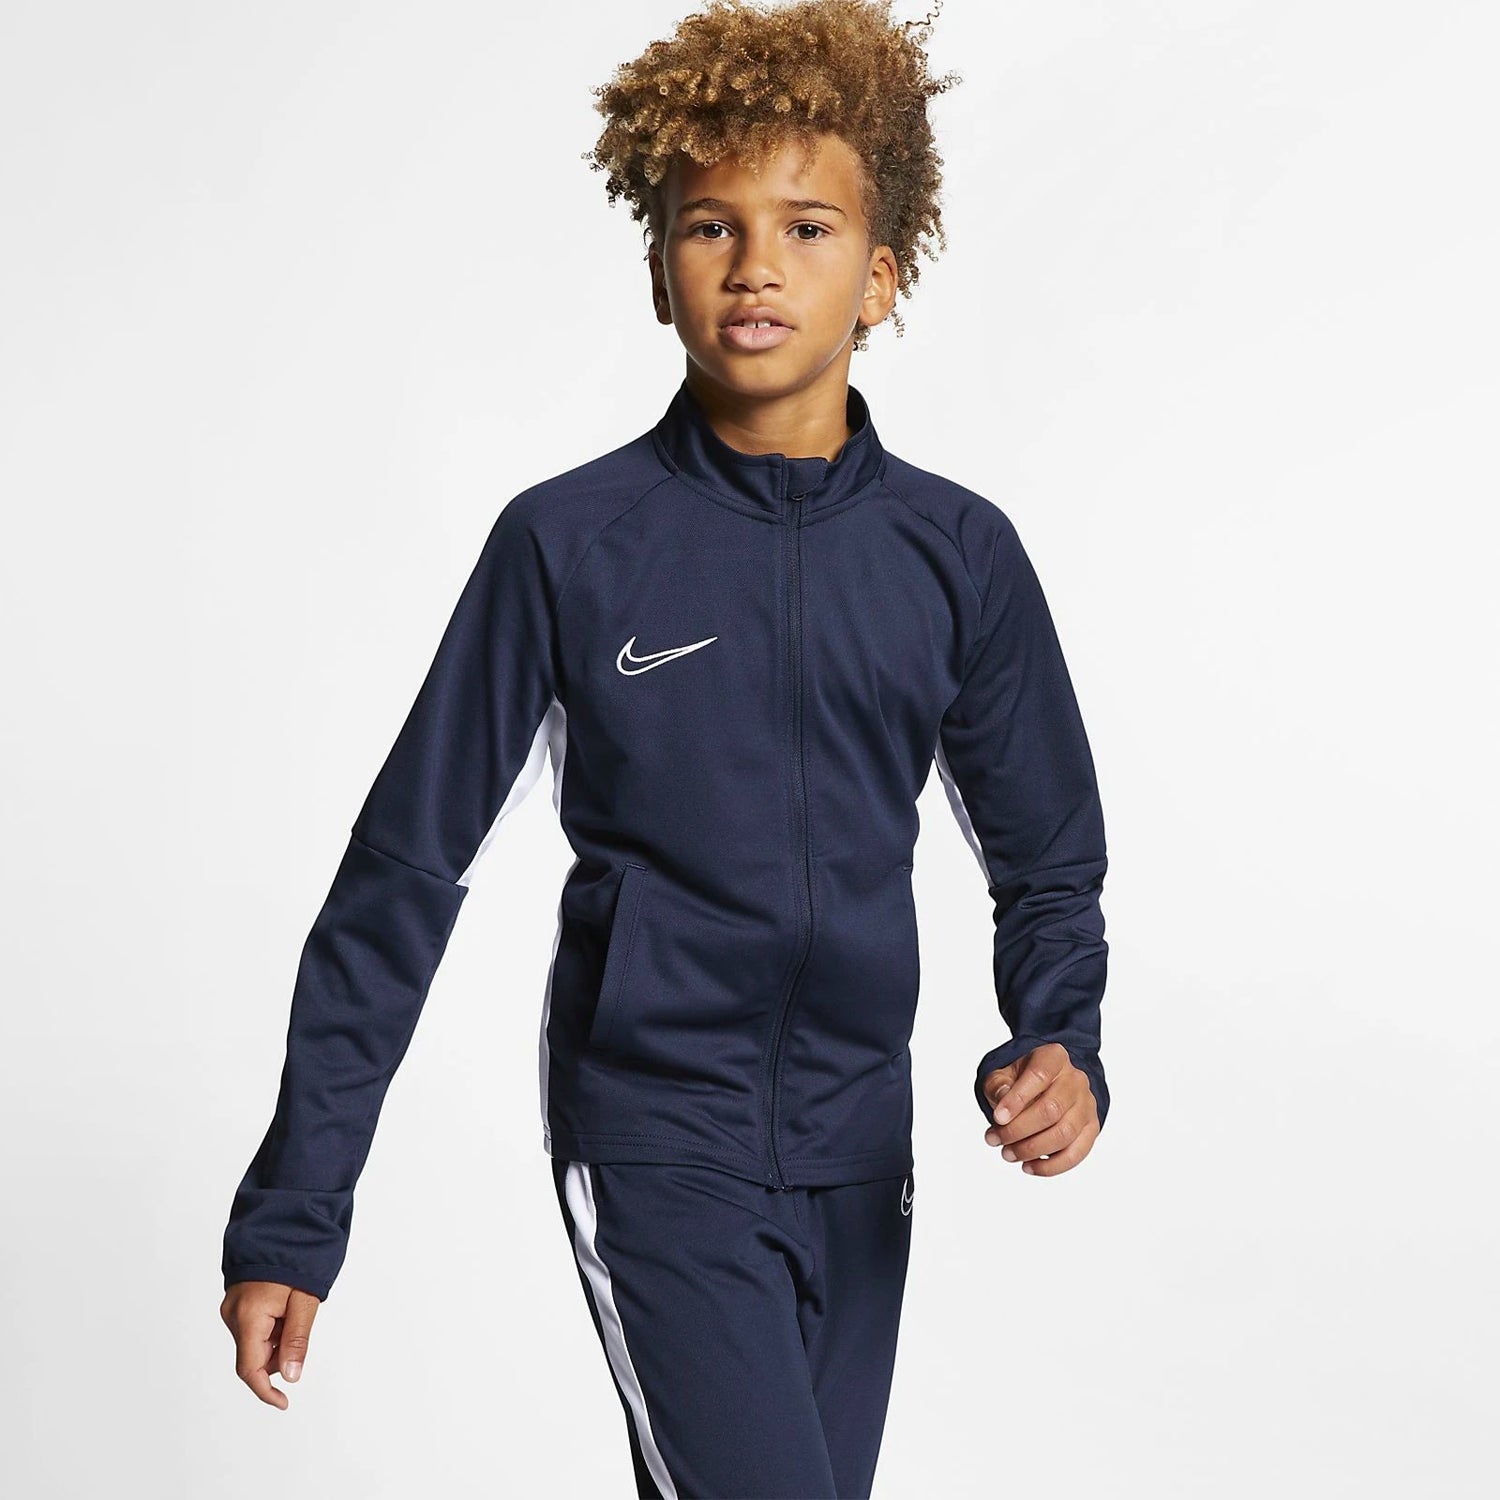 Youth Dry Academy Suit